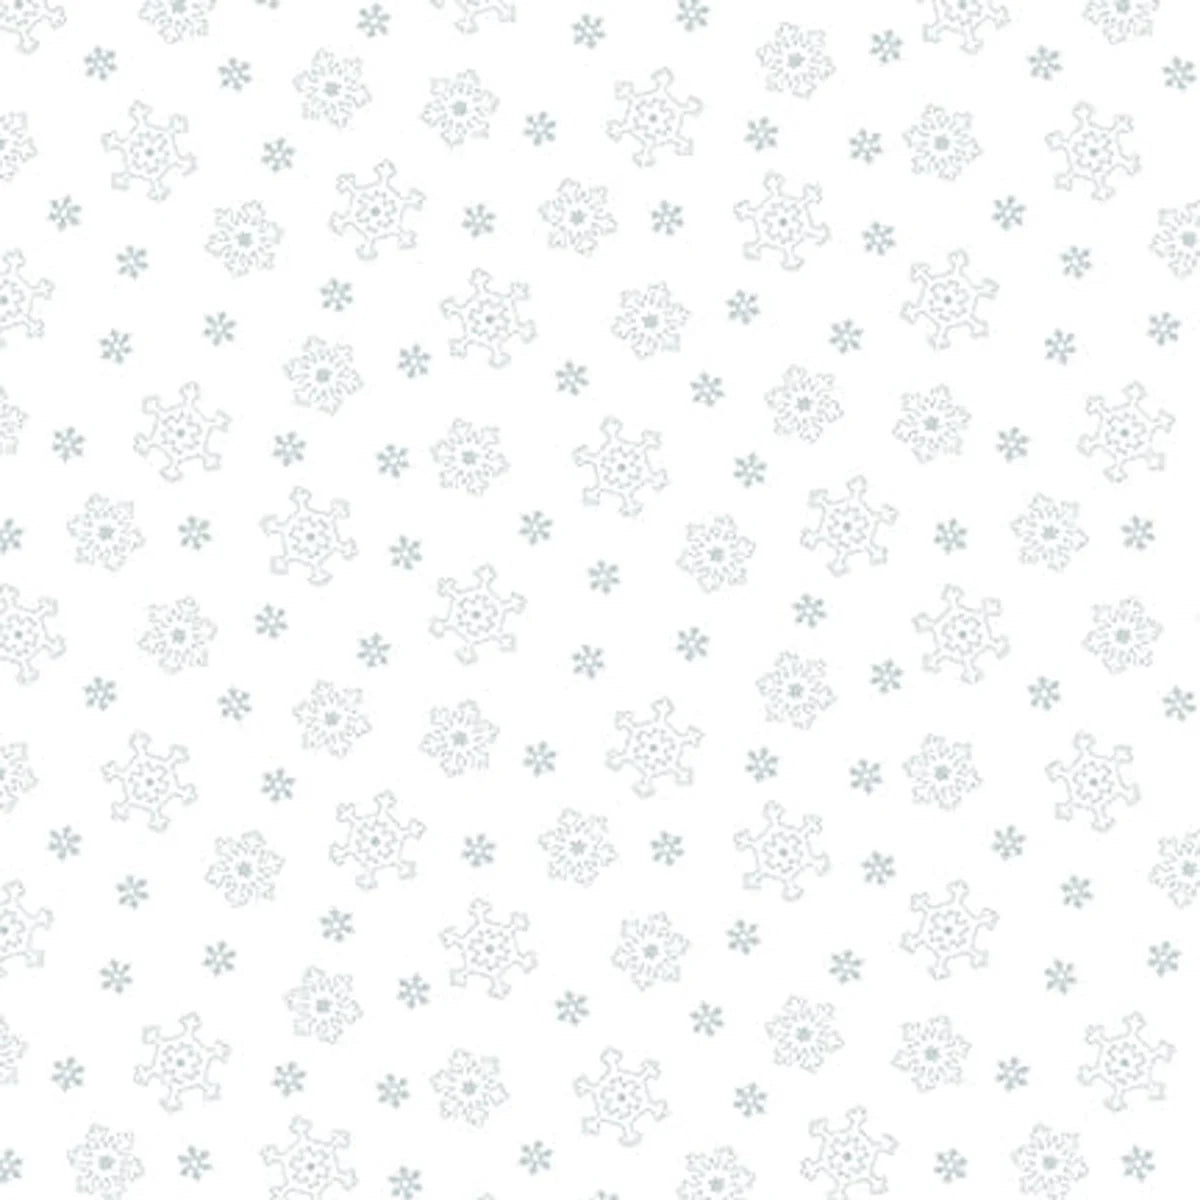 Quilter's Flour V - Small Snowflakes